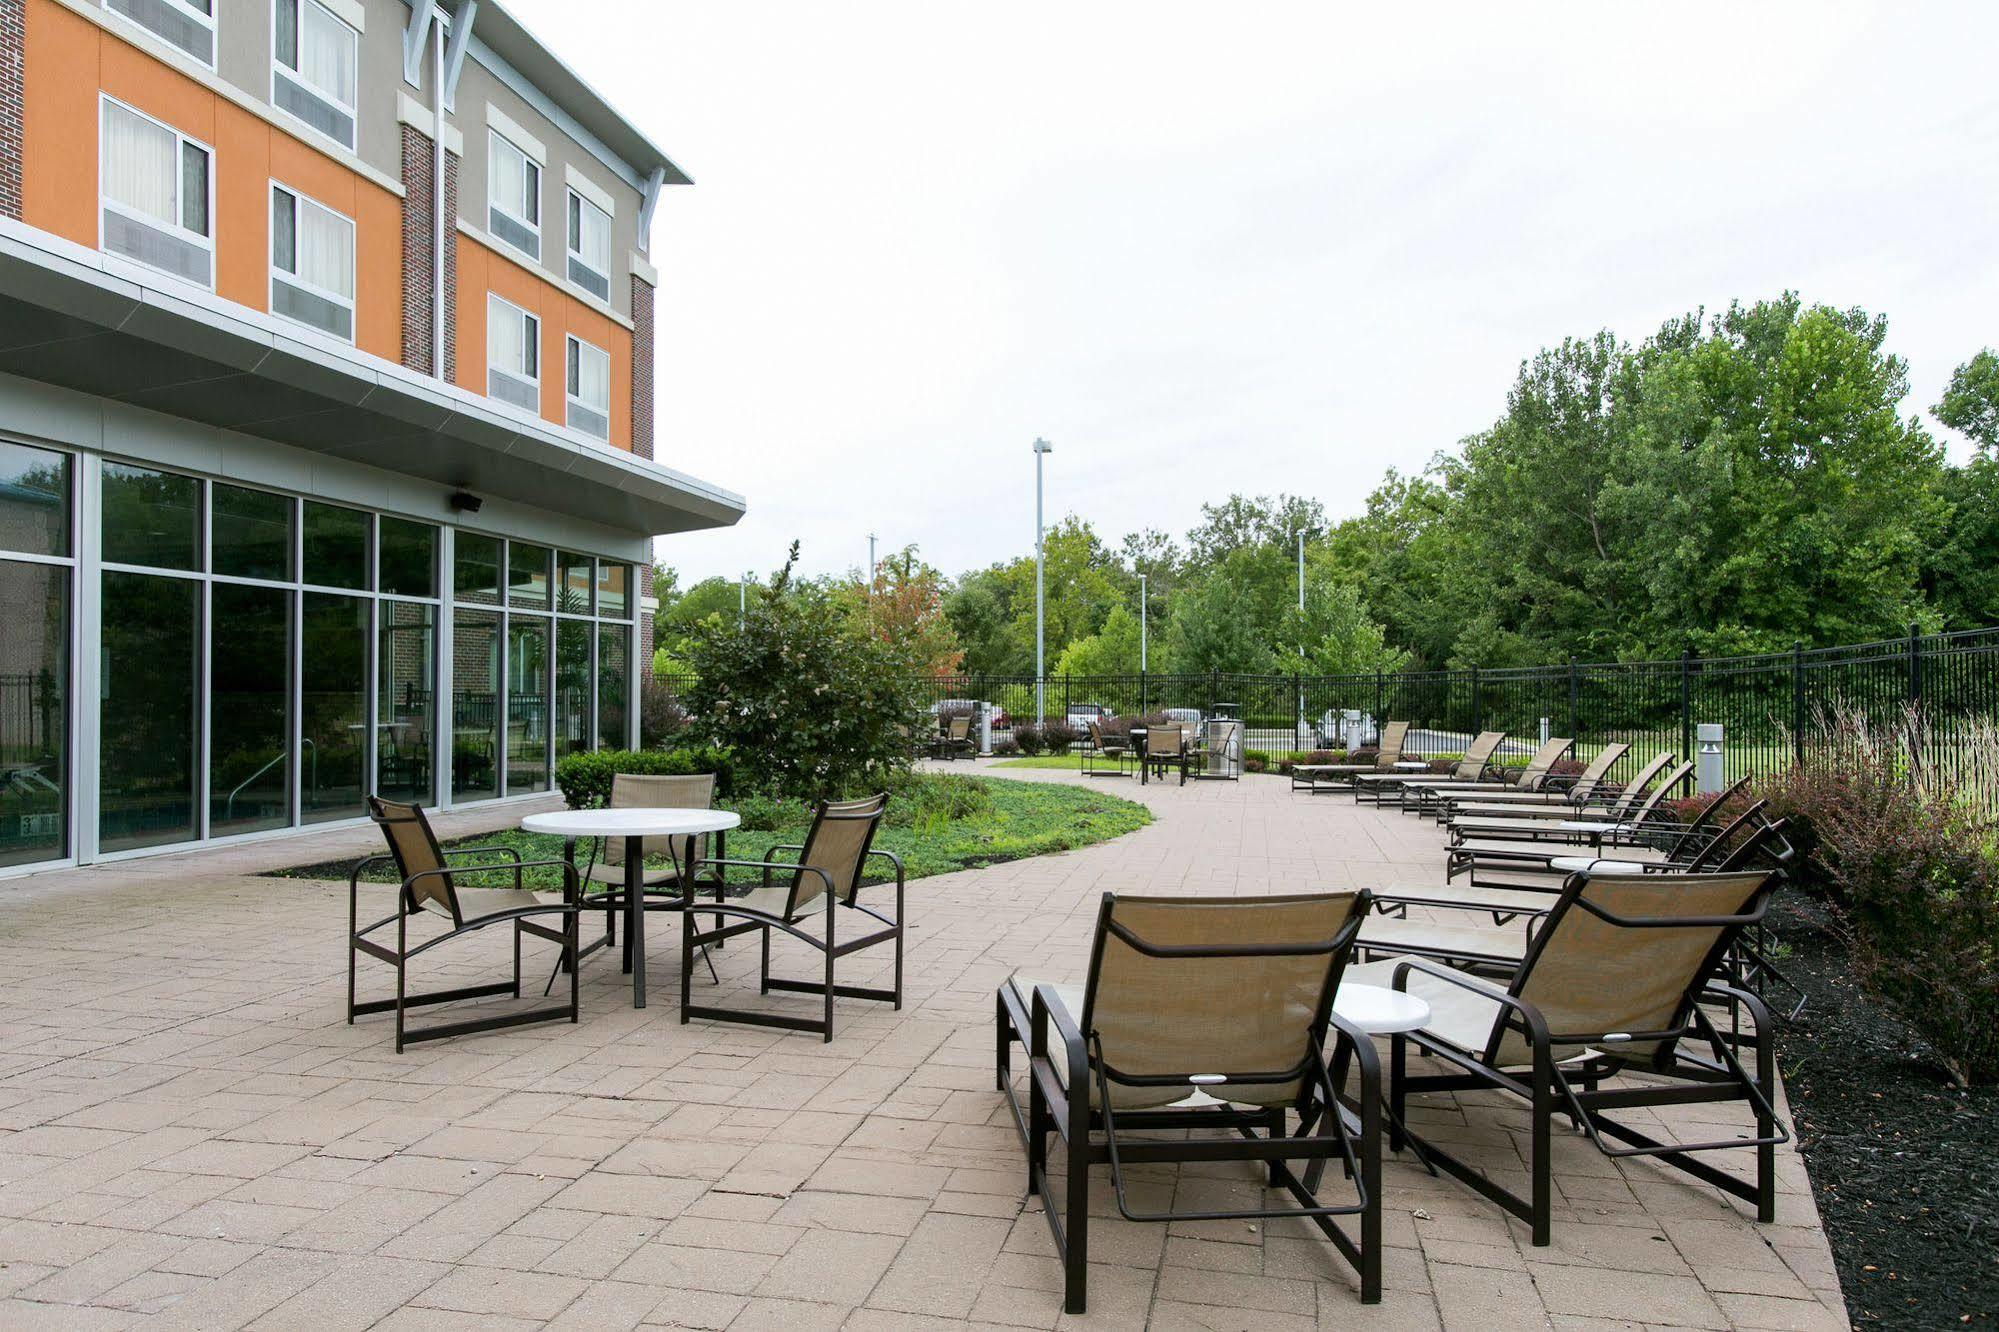 Springhill Suites By Marriott Indianapolis Airport/Plainfield Exterior photo